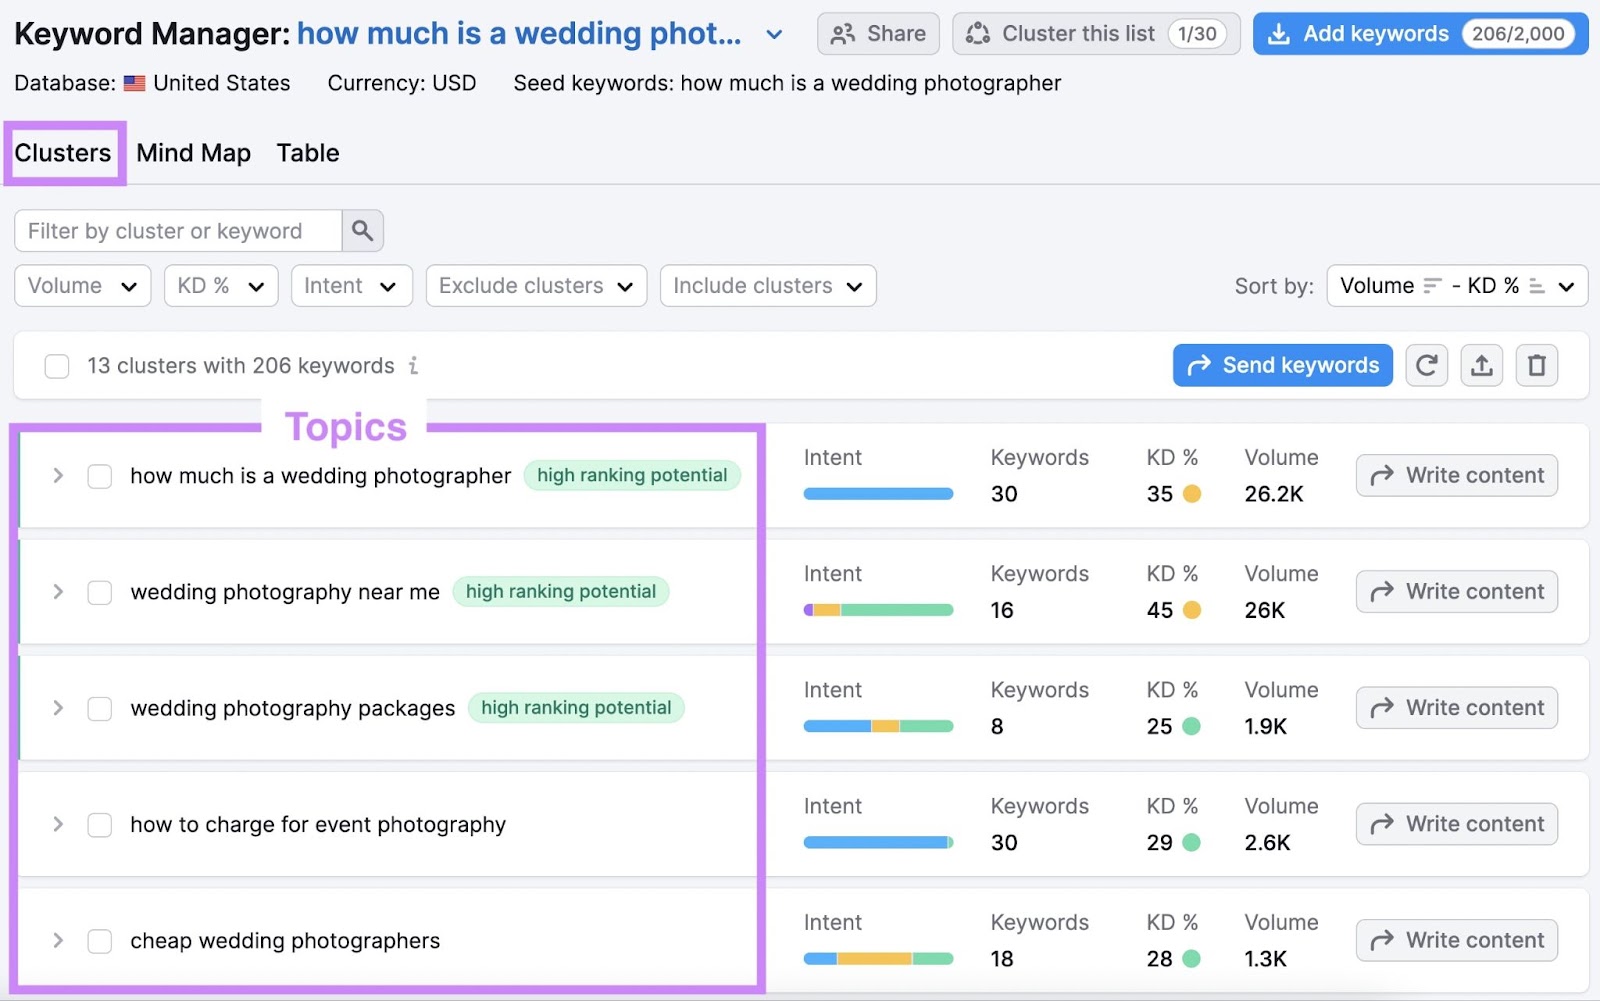 Topics related to “how much is a wedding photographer" in Keyword Manager